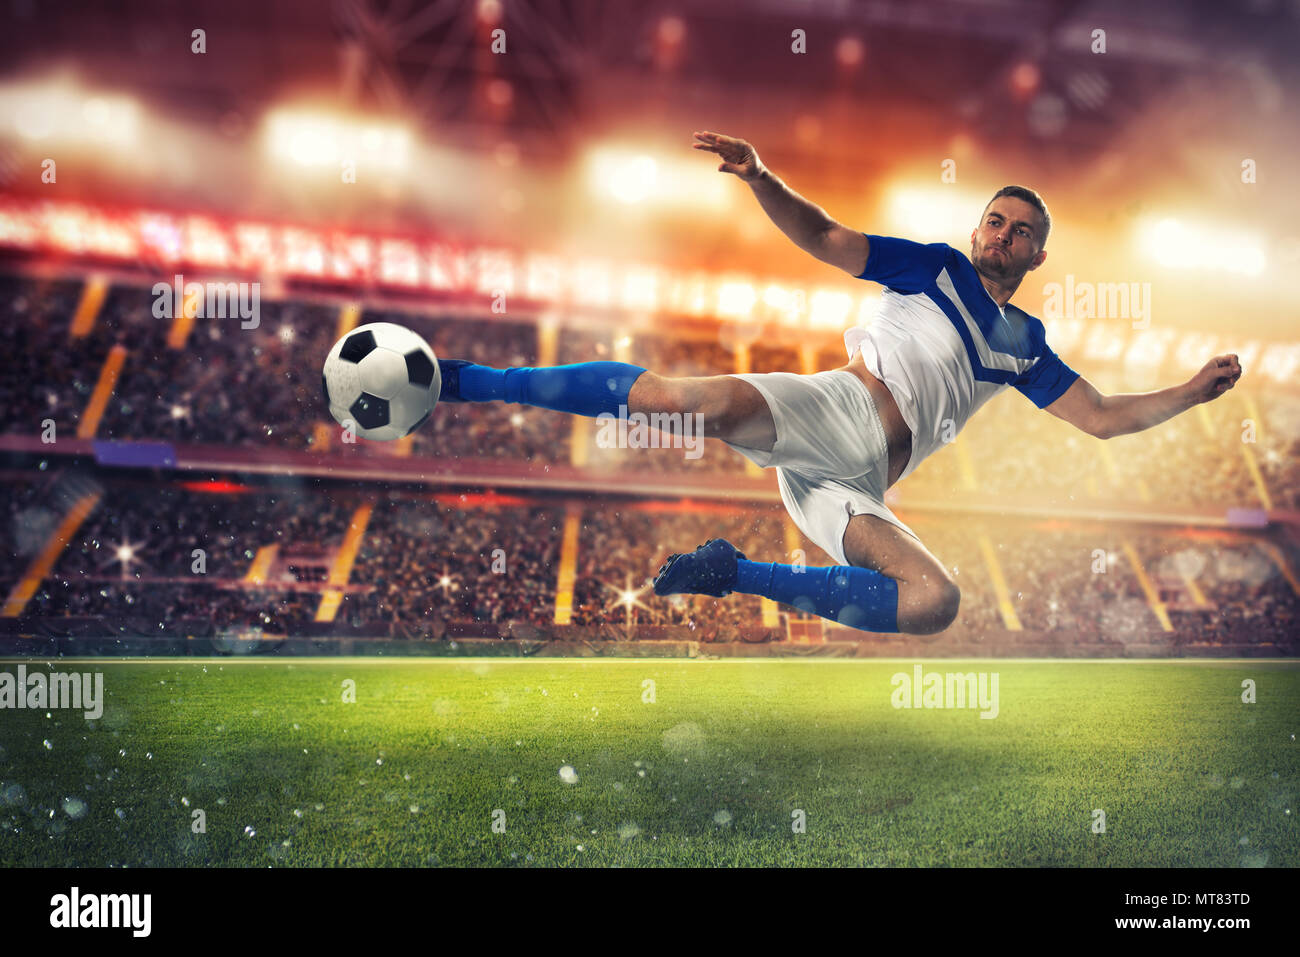 Soccer striker hits the ball with an acrobatic kick Stock Photo